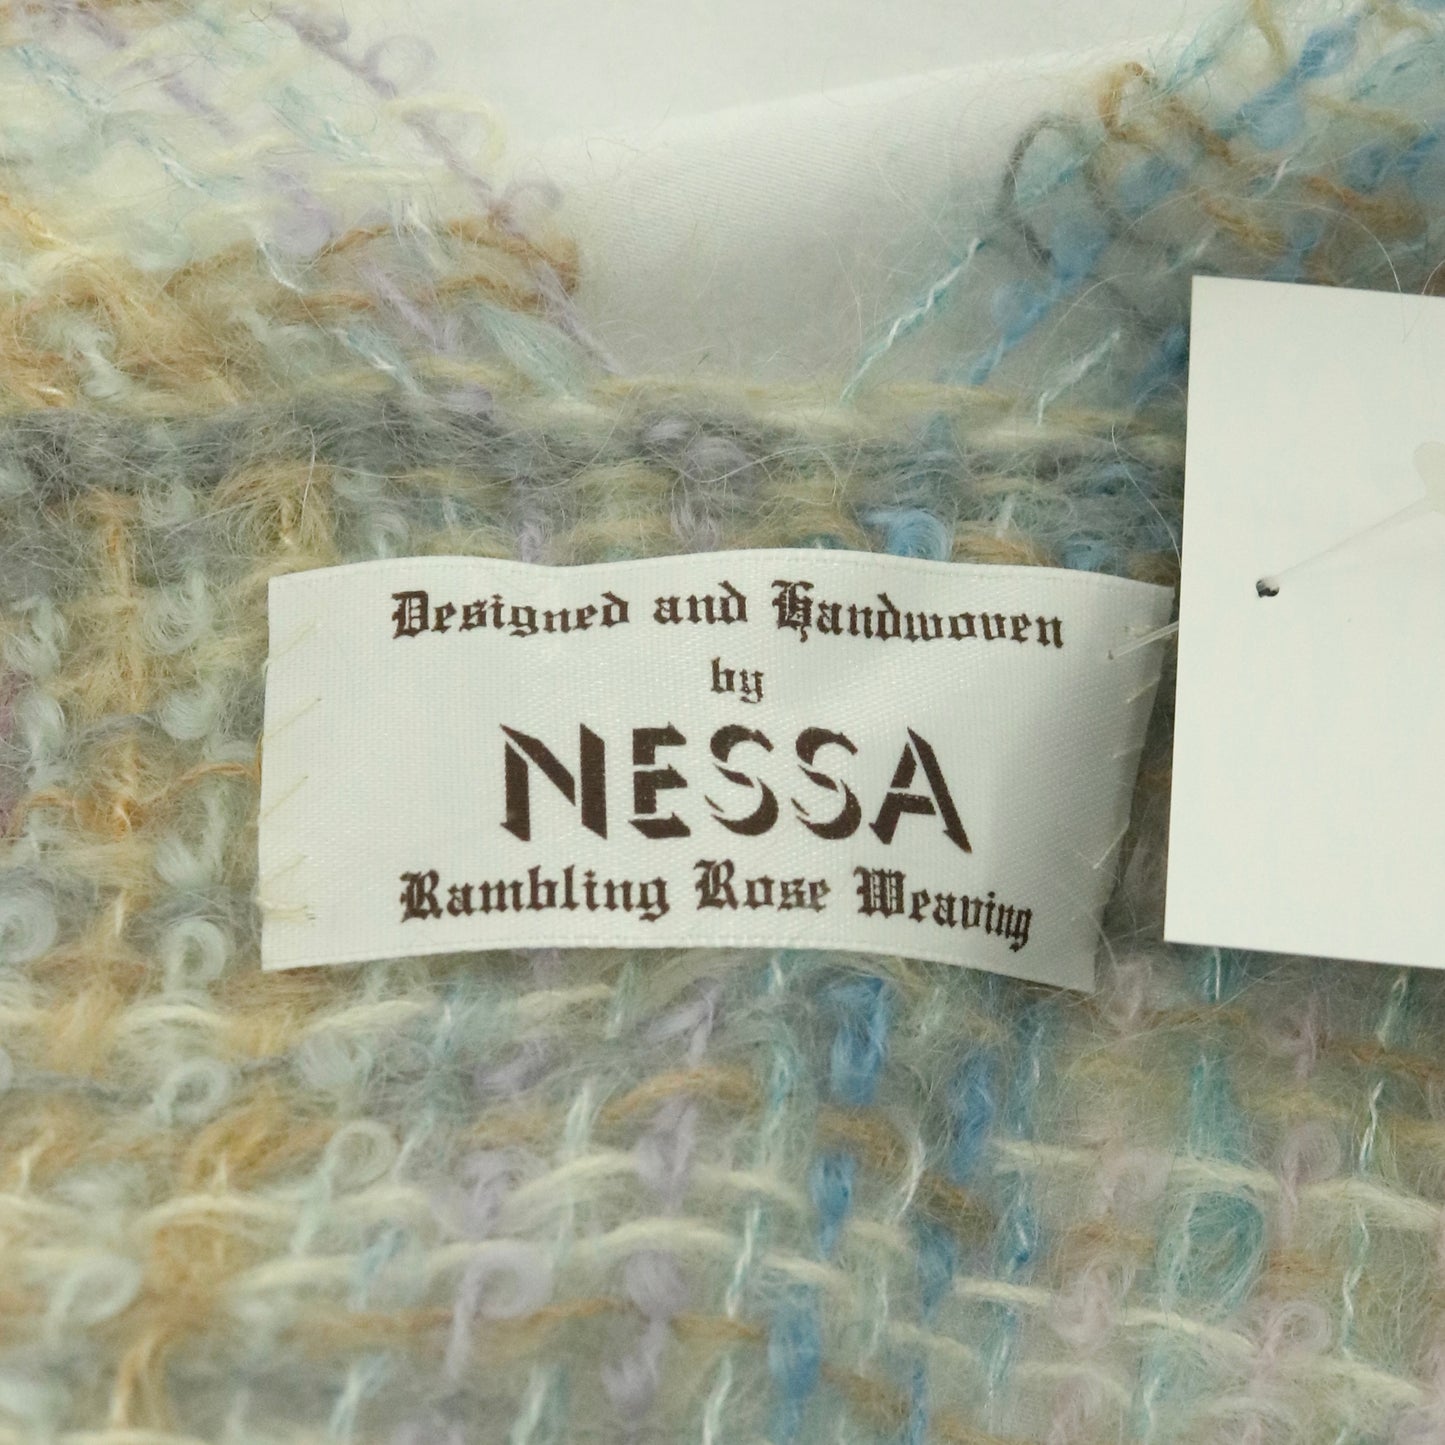 00's "NESSA" mohair touch knit cardigan